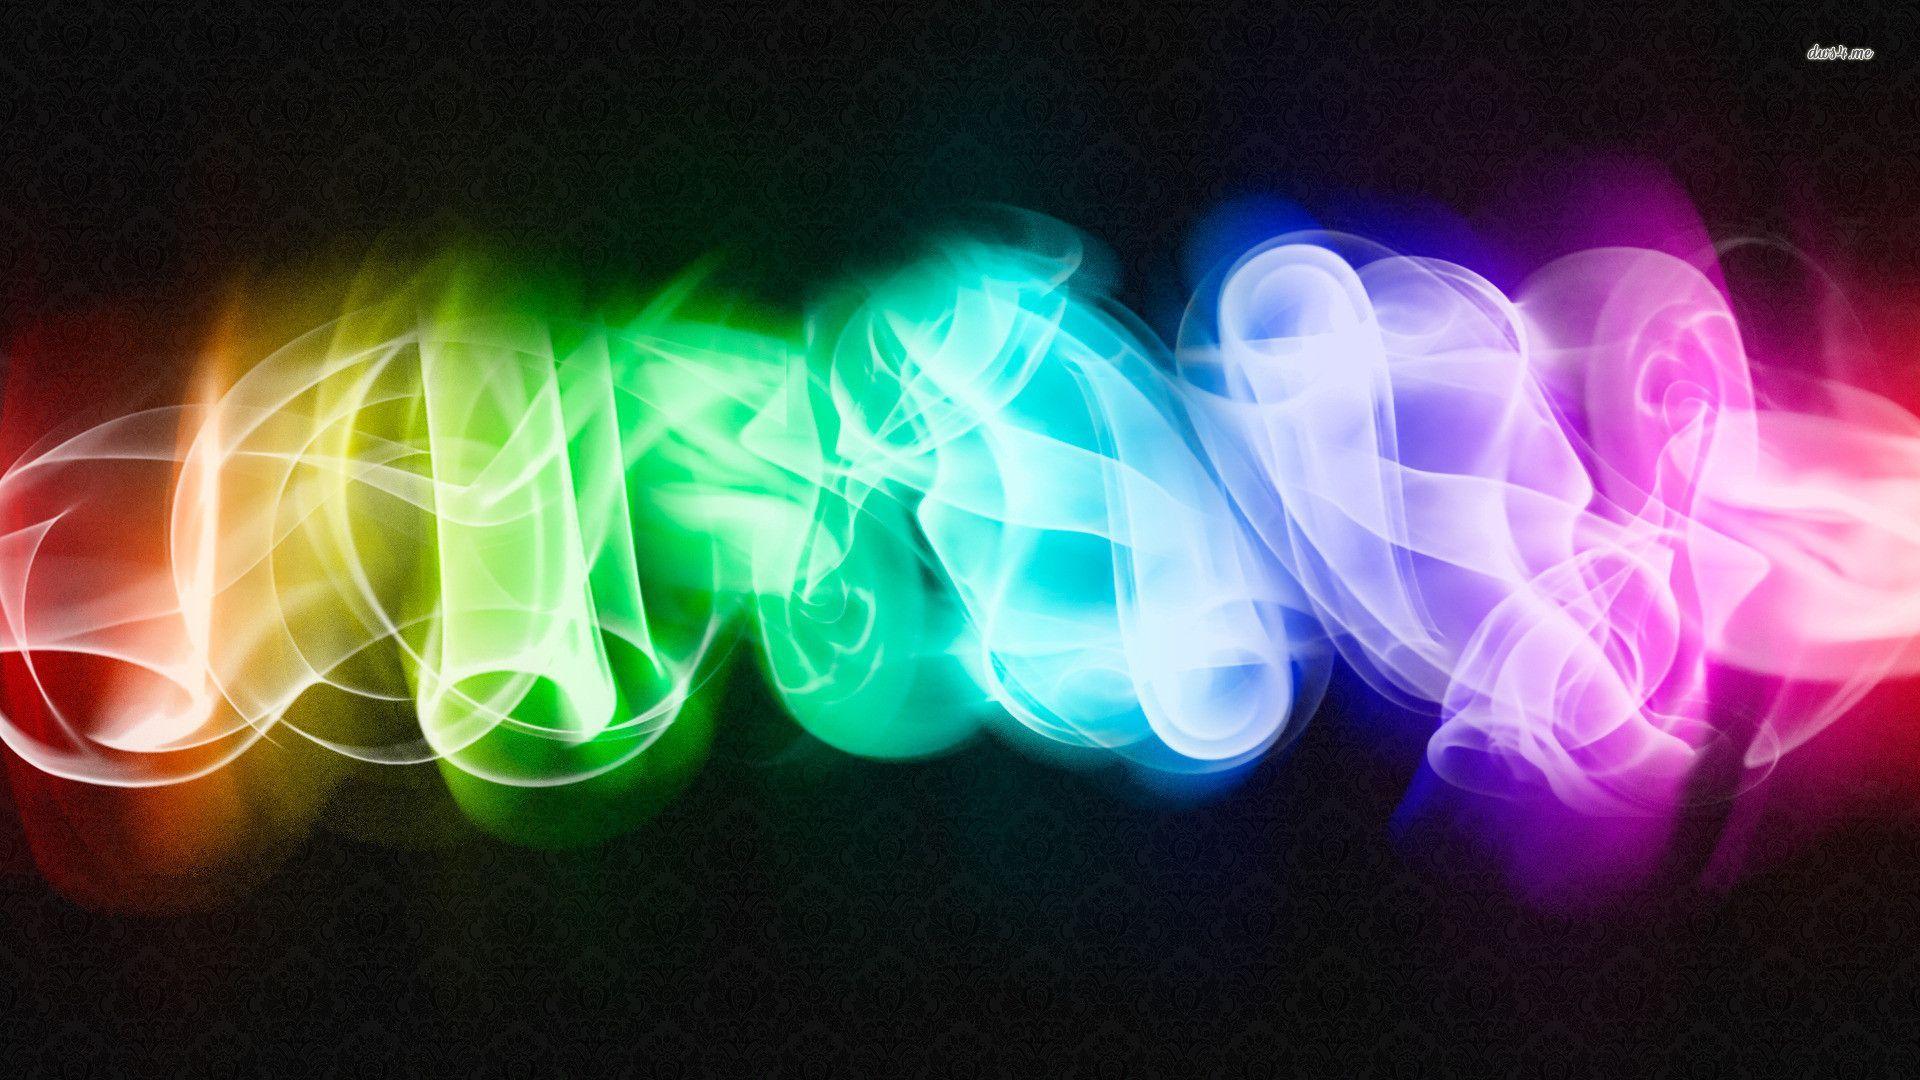 Wallpaper For > Colorful Neon Smoke Background